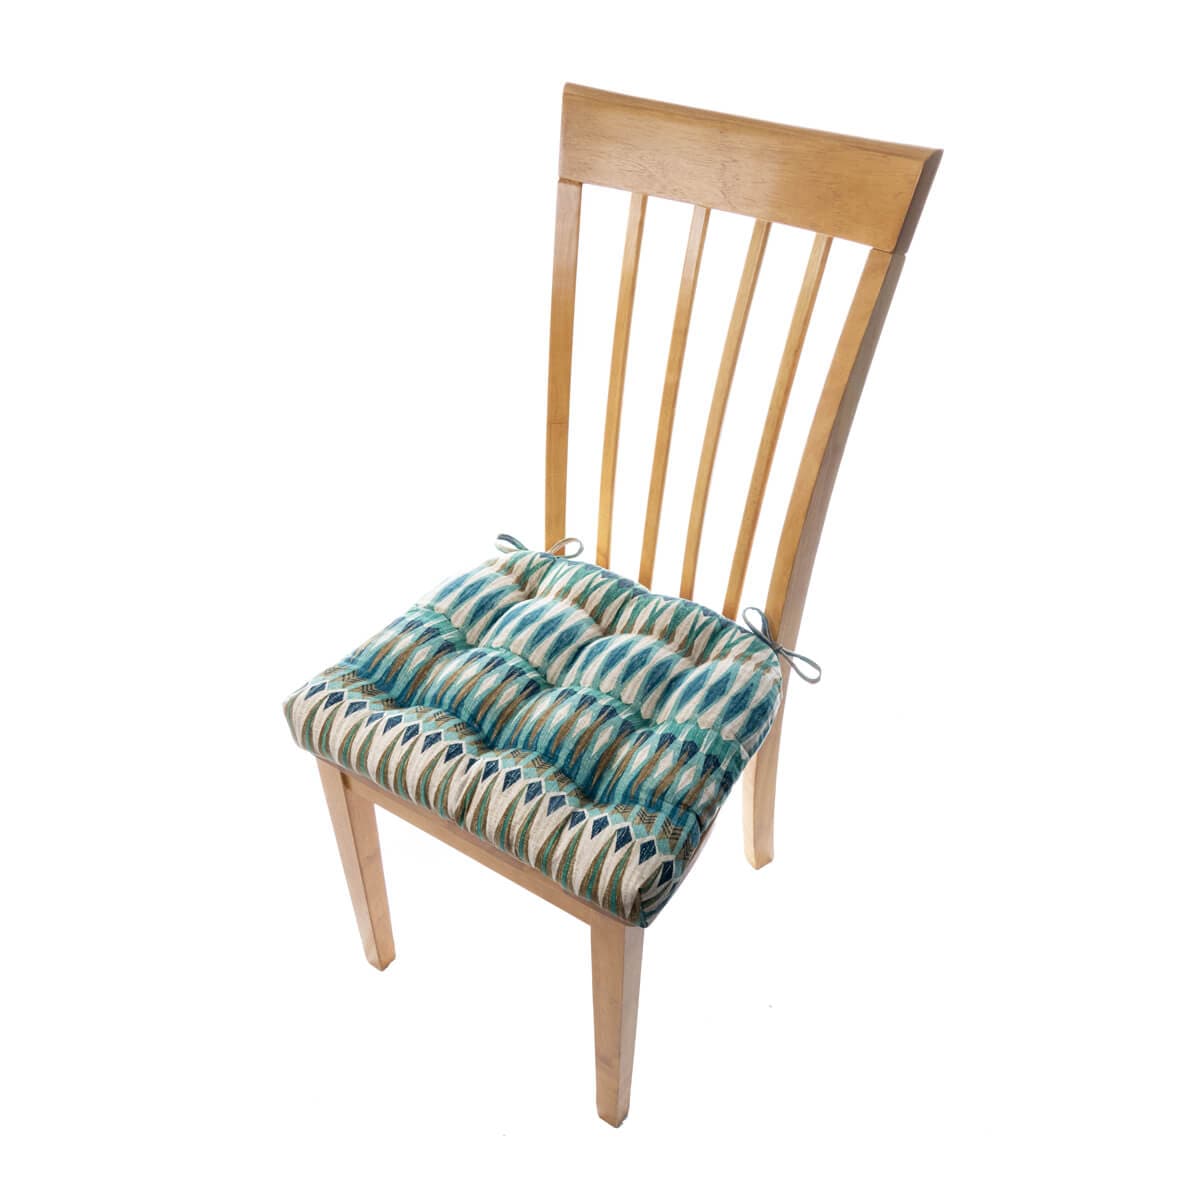 Southwest Arapaho Dining Chair Pads - Barnett Home Decor - Turquoise, Teal, & Gold